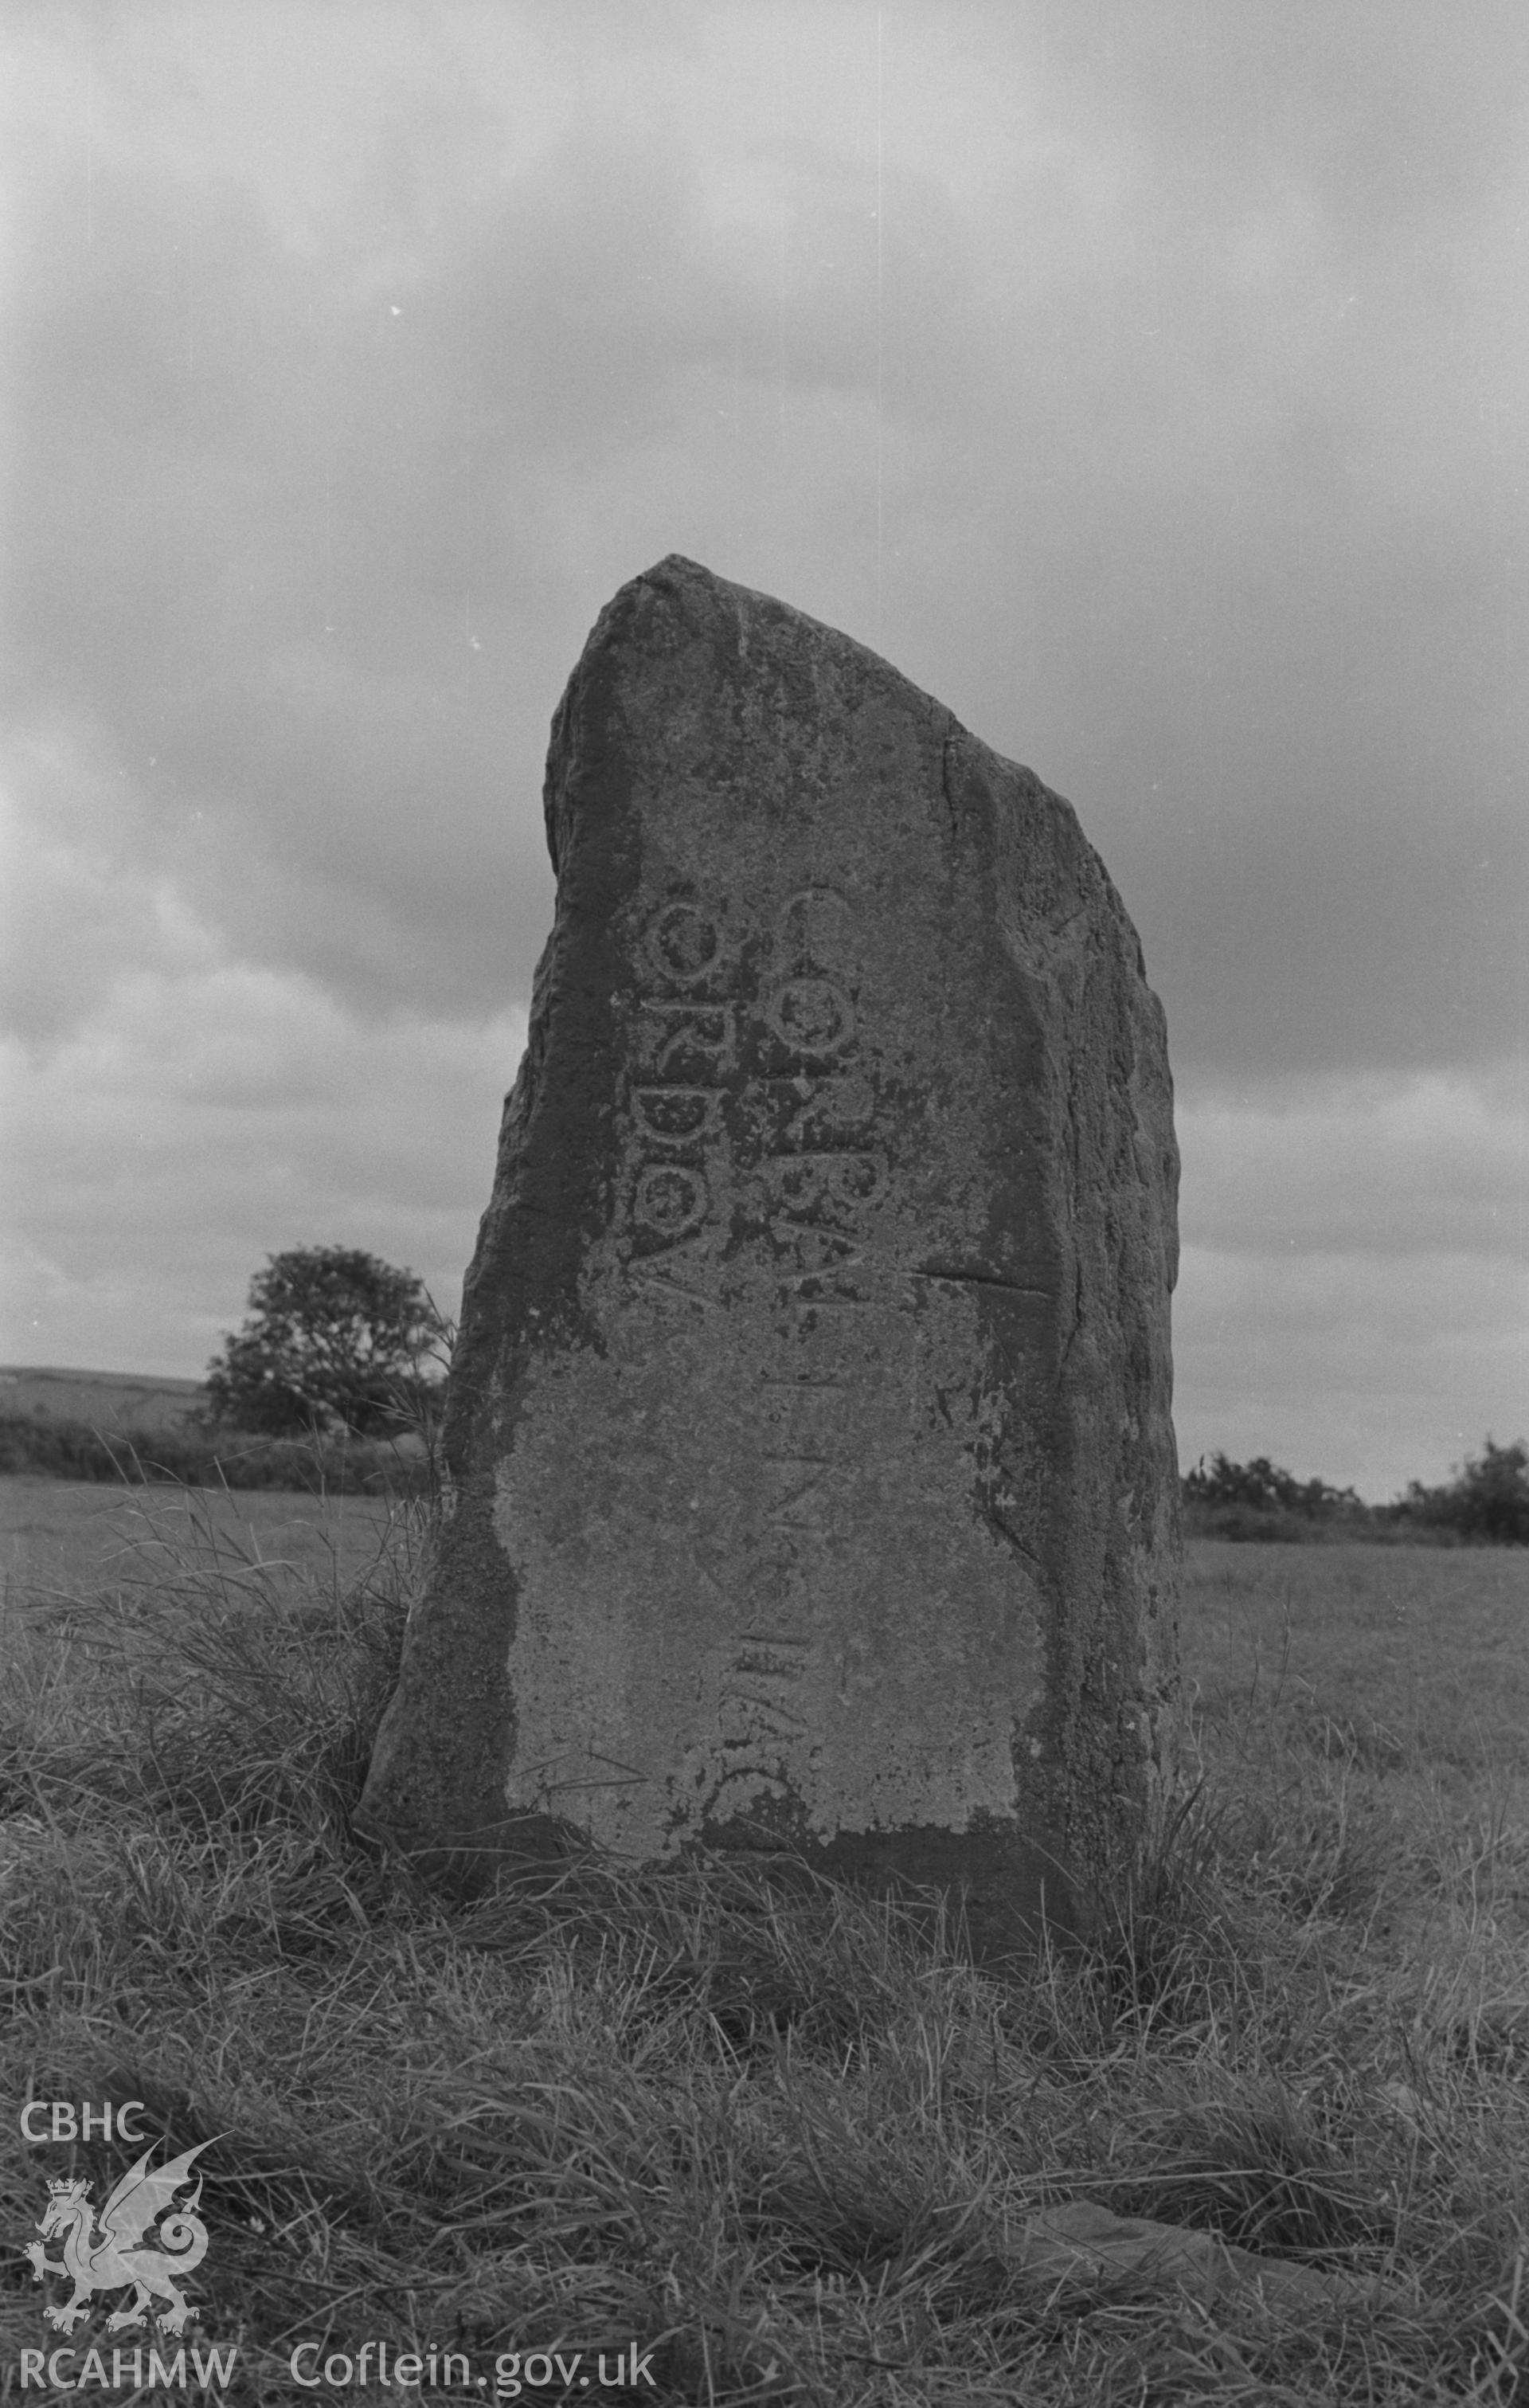 Digital copy of a black and white negative showing the Corbalengi stone. Photographed in August 1963 by Arthur O. Chater from Grid Reference SN 2891 5137, looking south west.